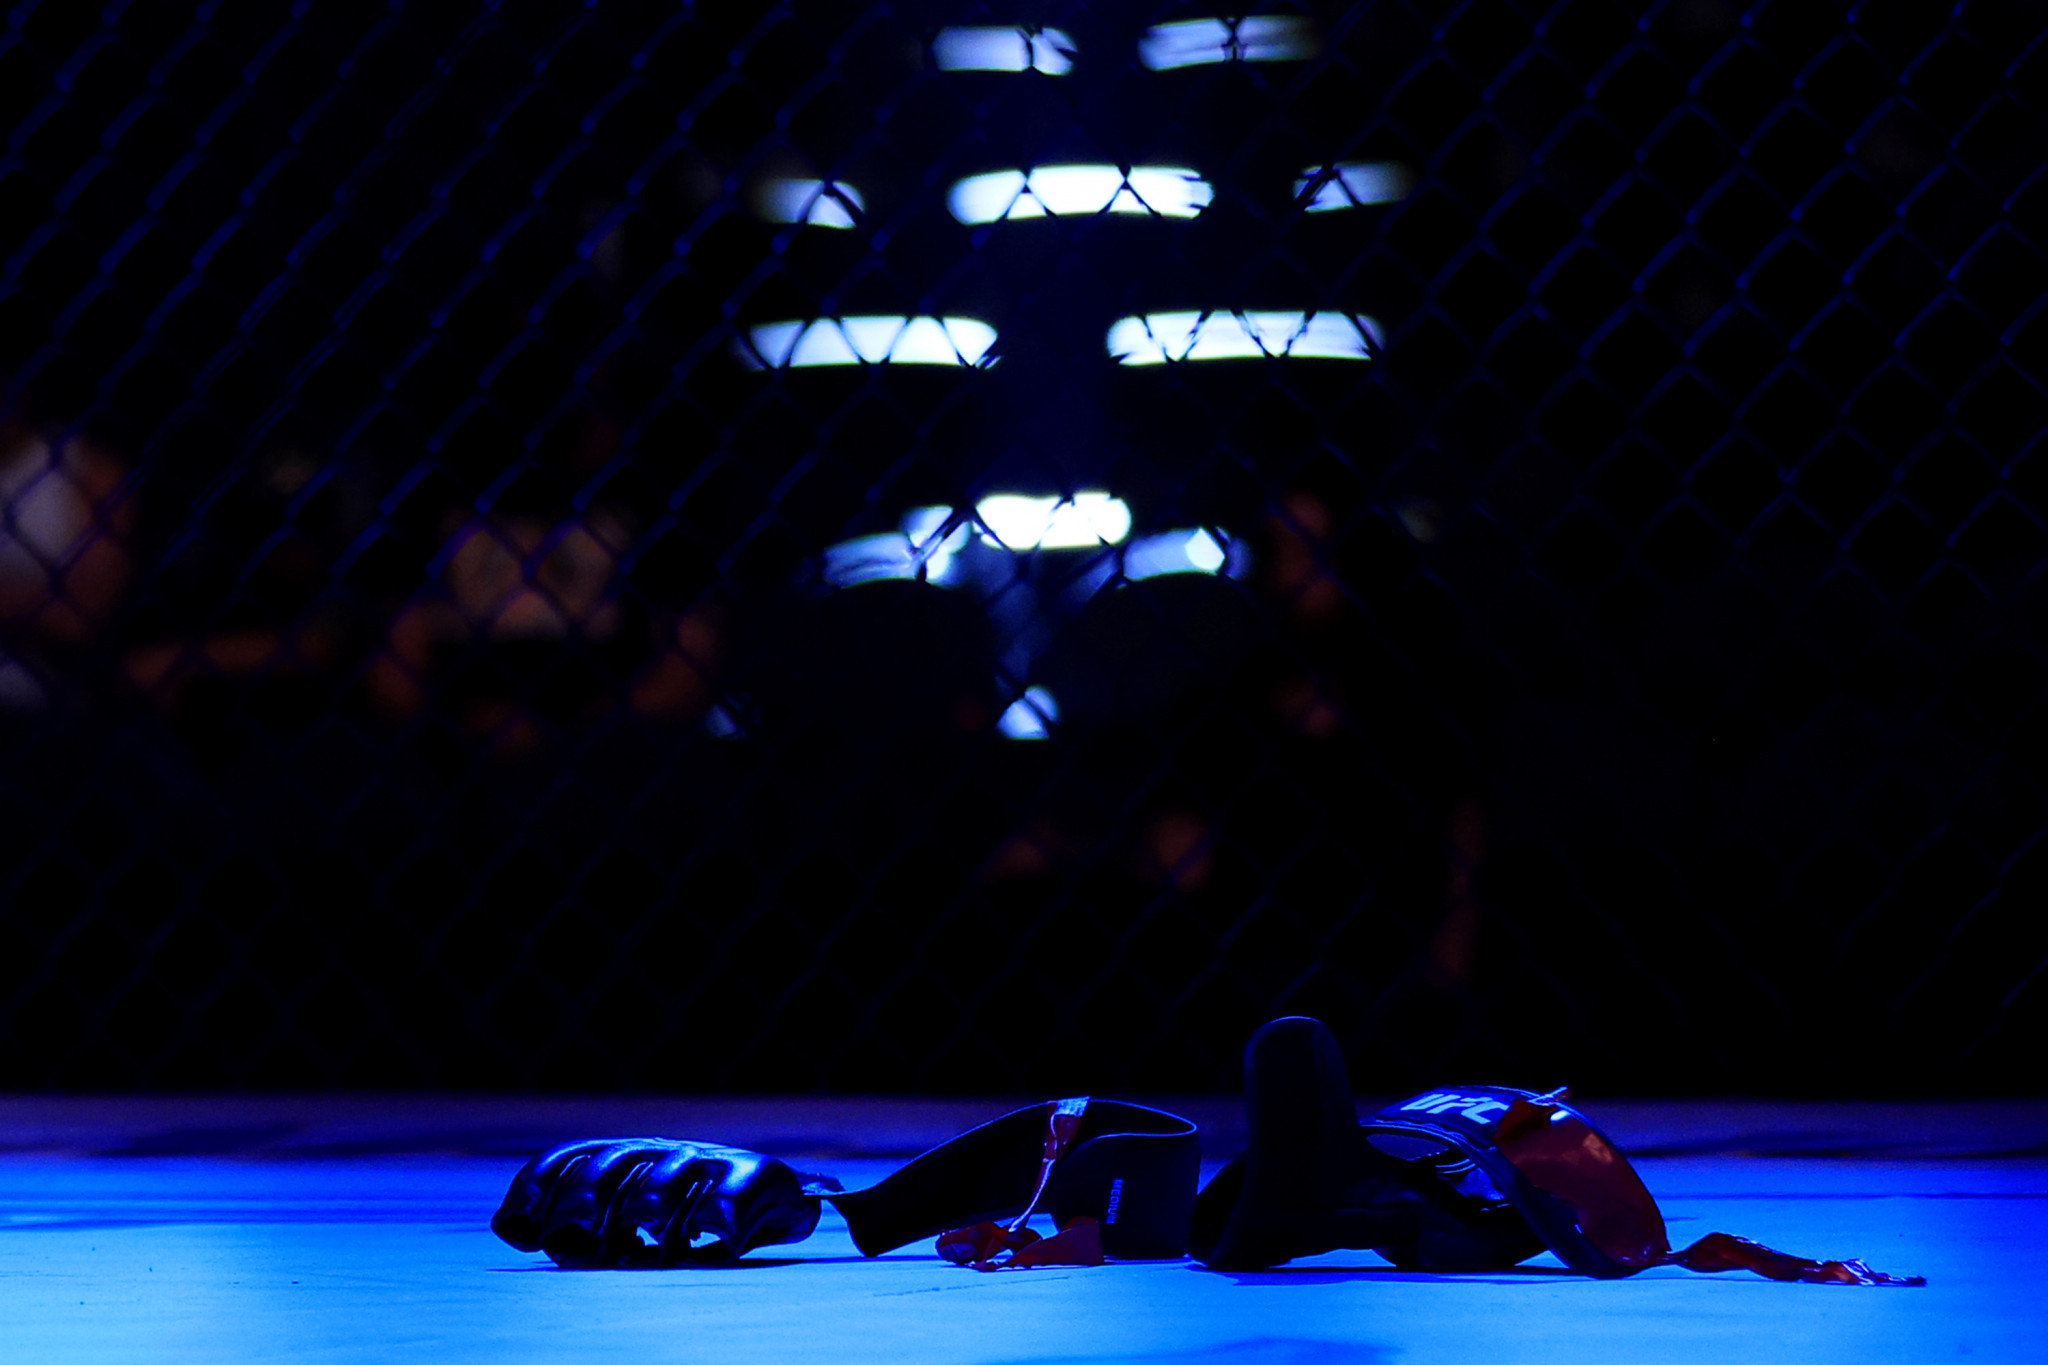 MMAFM to conduct monthly trials to spot up-and-coming fighters 